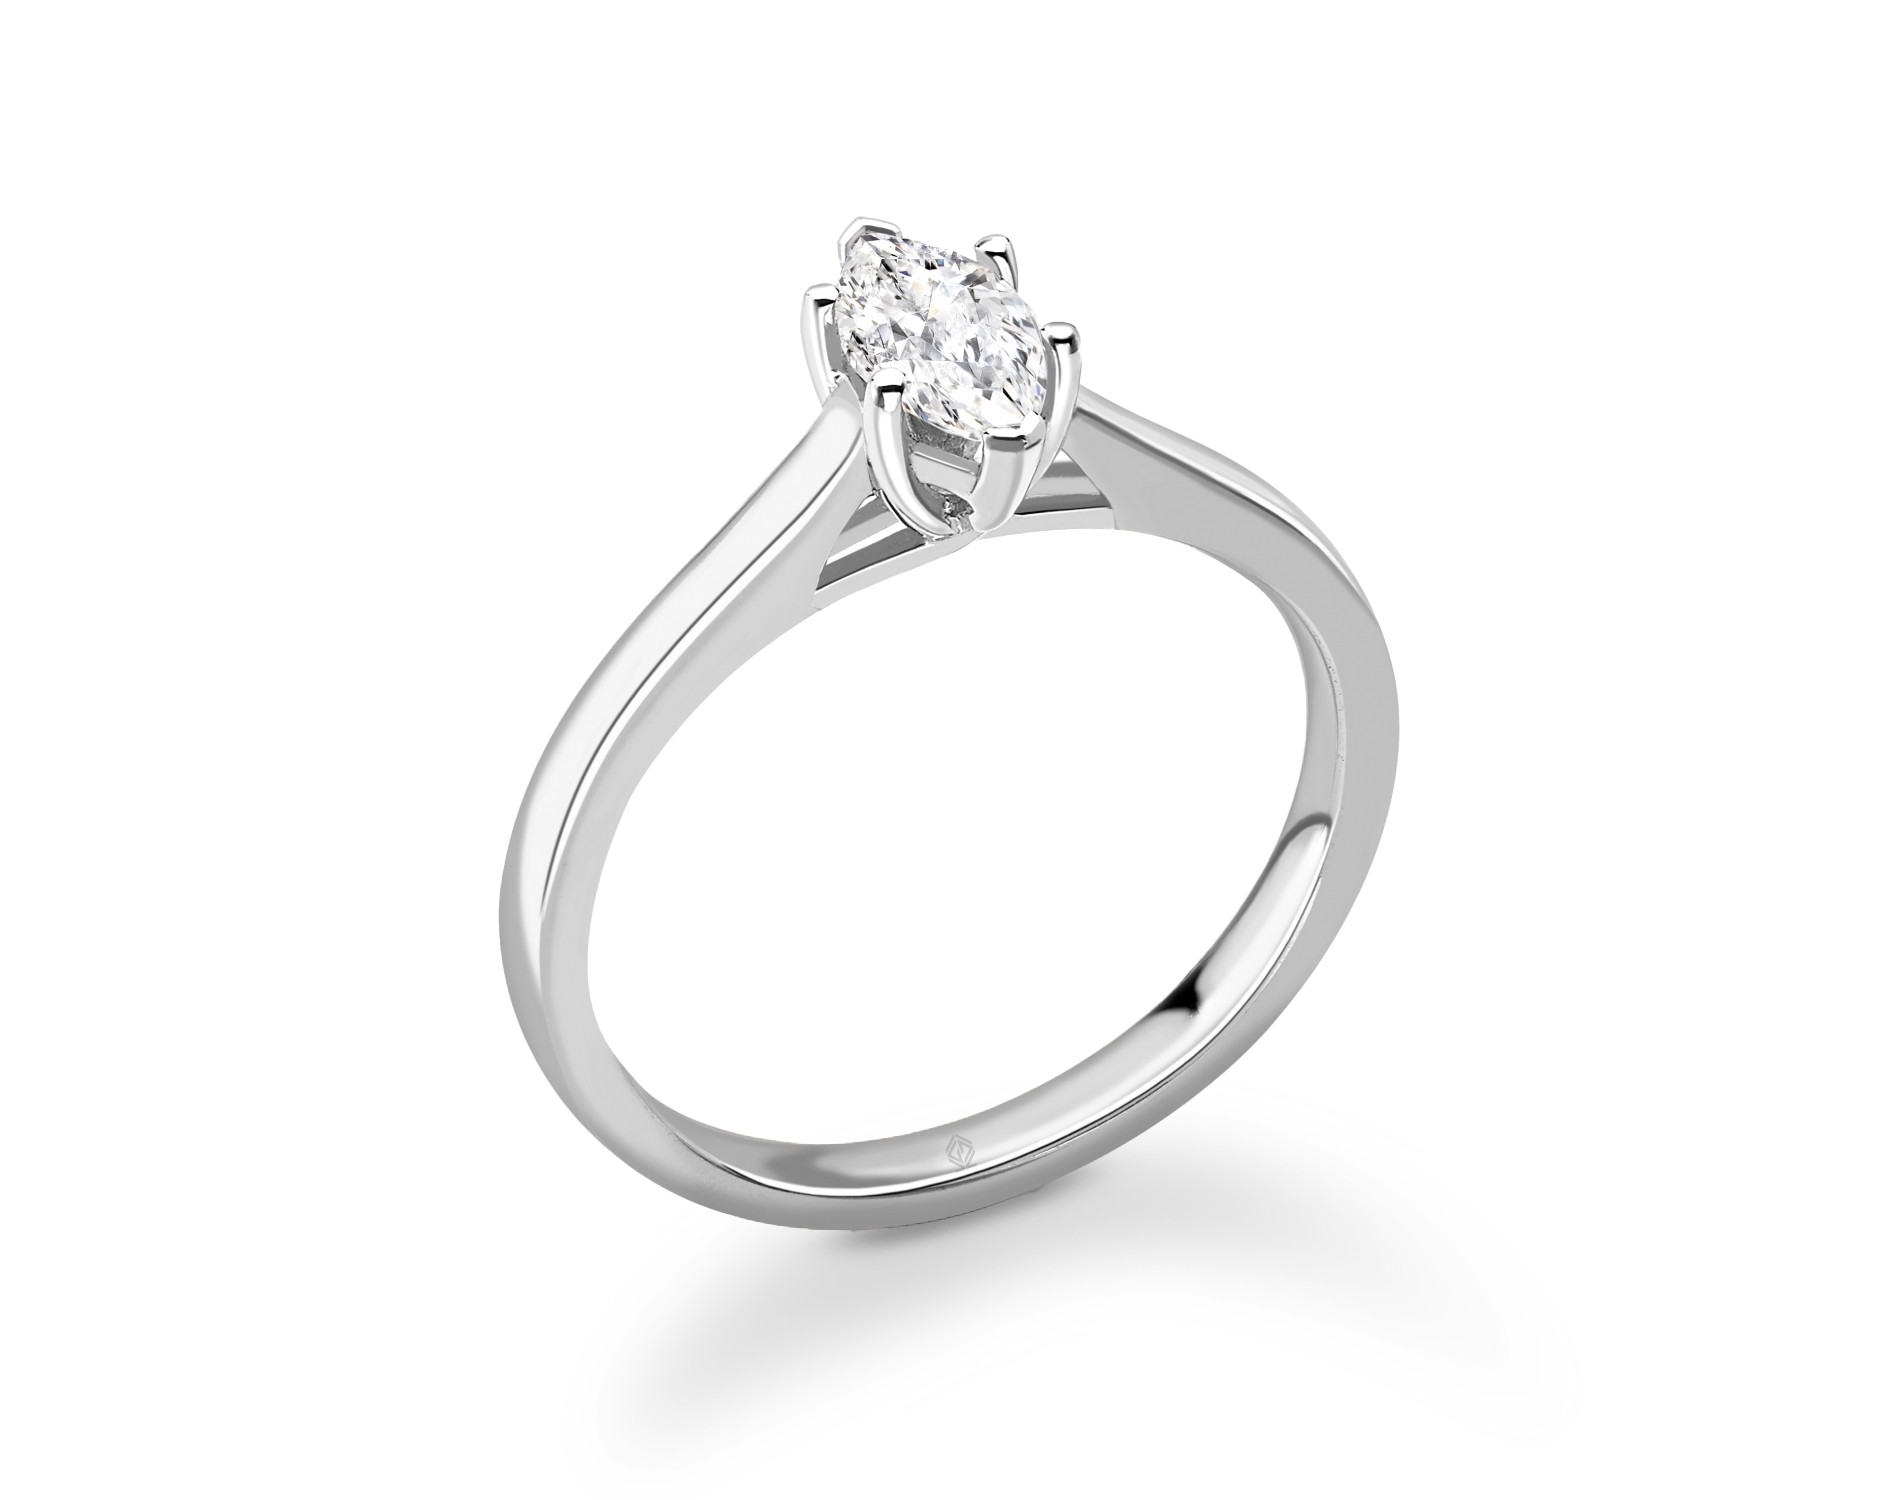 18K WHITE GOLD MARQUISE CUT SOLITAIRE DIAMOND ENGAGEMENT RING